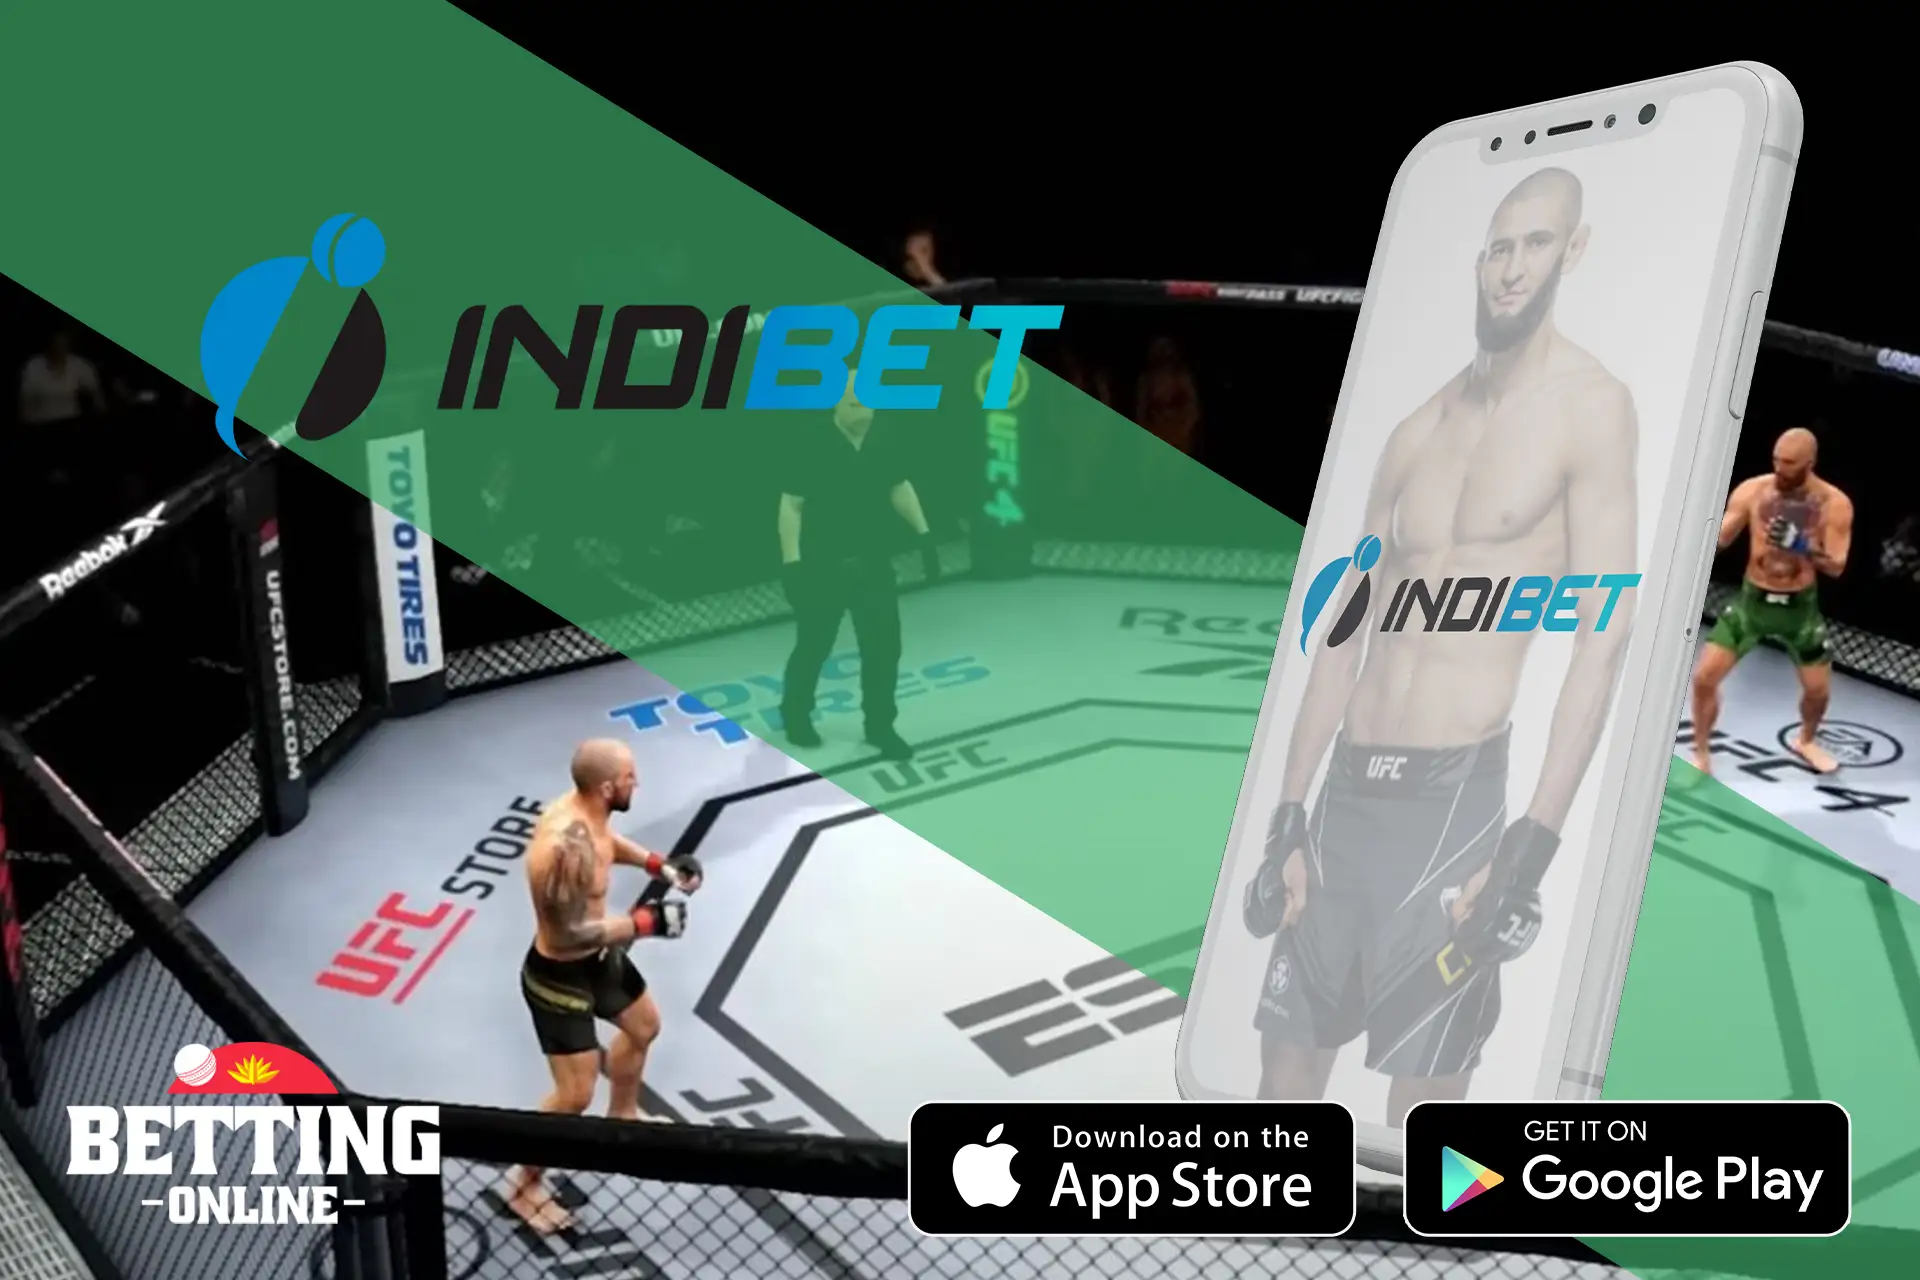 Betting on the outcome of the UFC match is offered by bookmaker Indibet in Bangladesh.